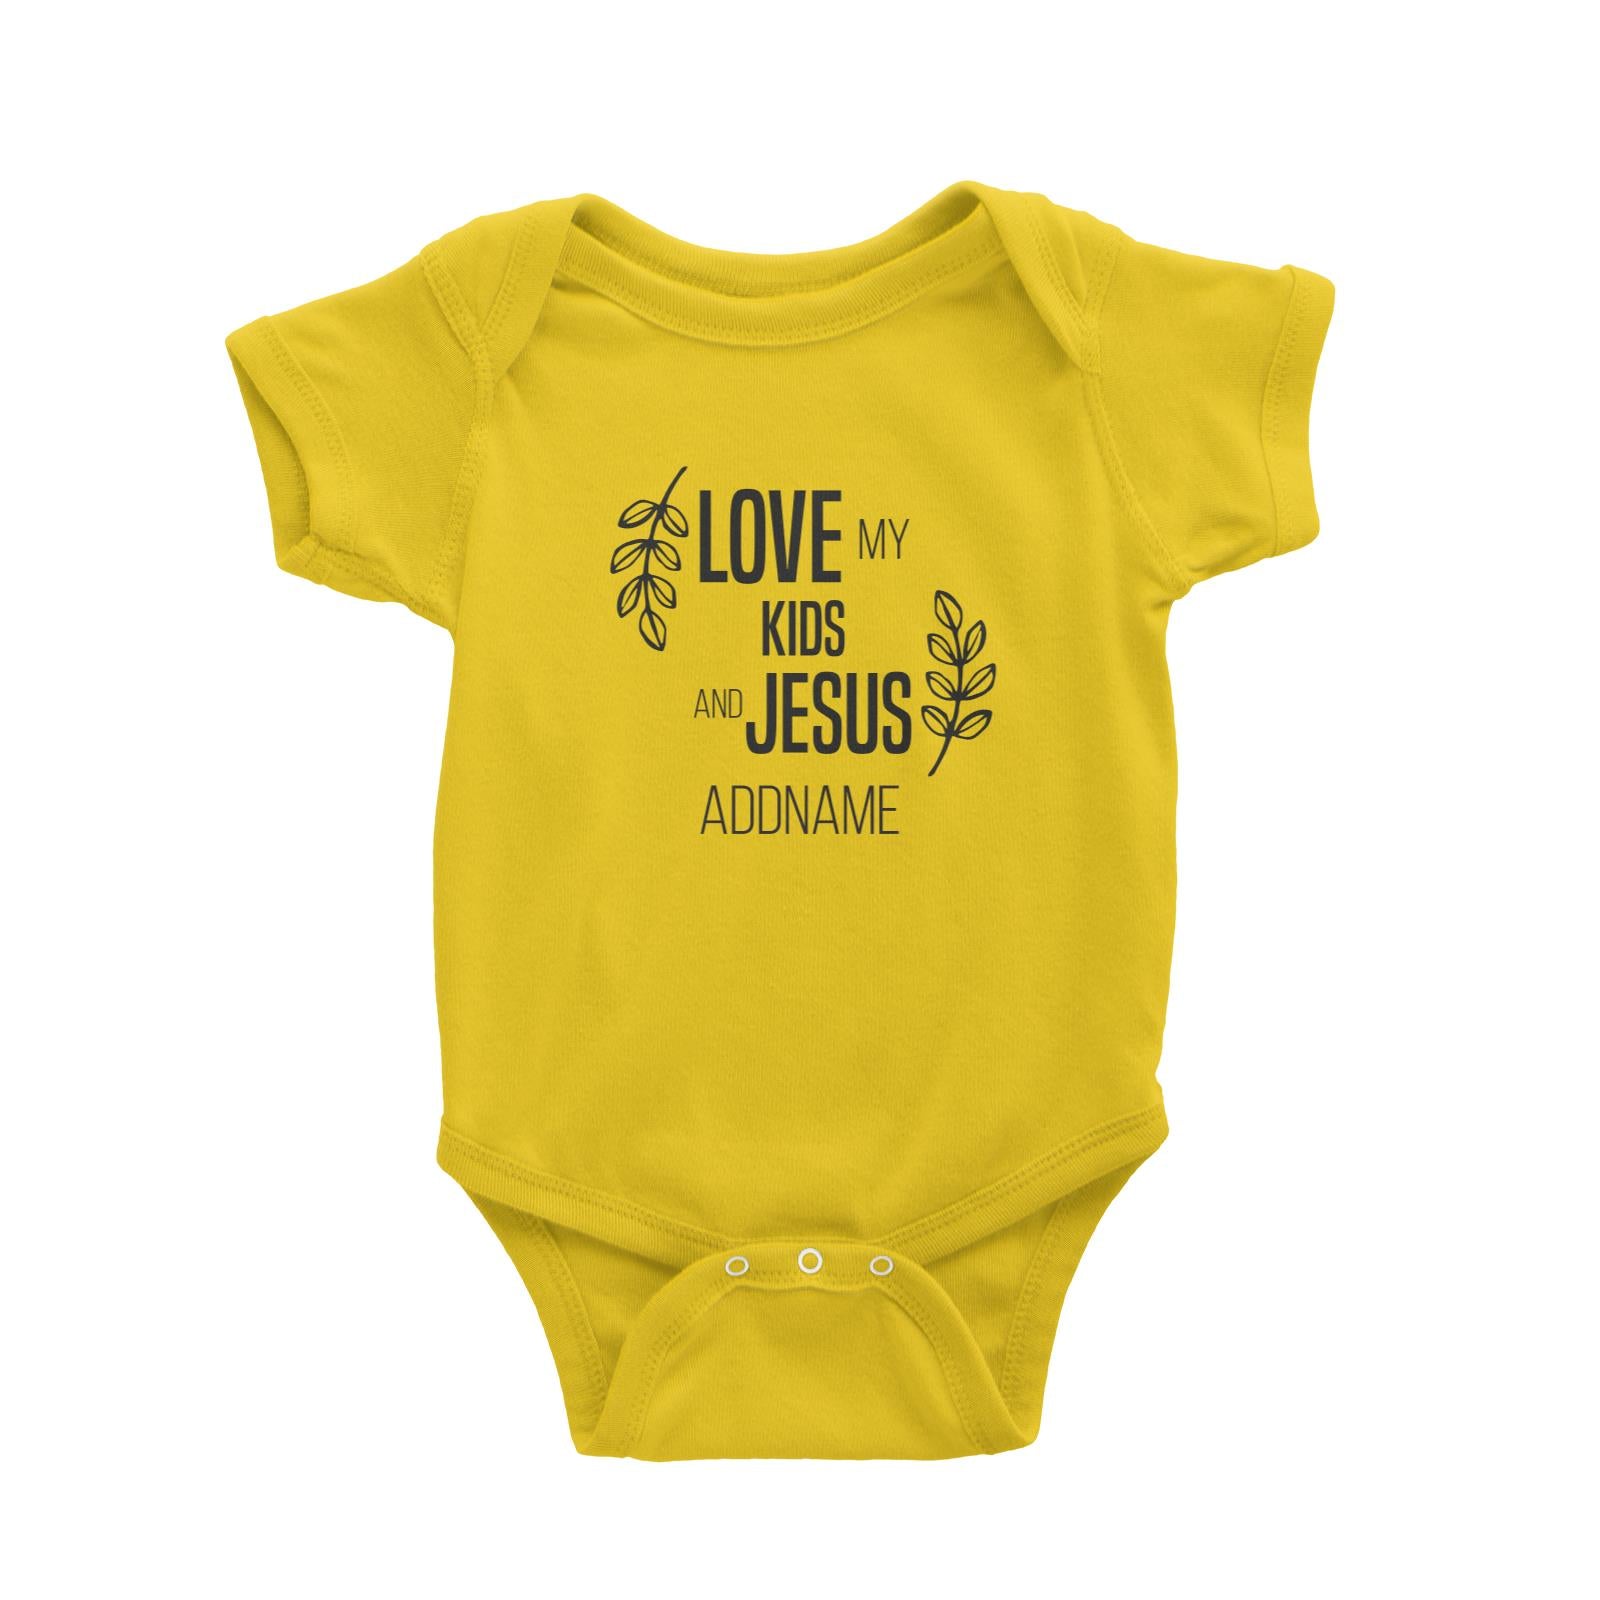 Christian Series Love My Kids And Jesus Addname Baby Romper